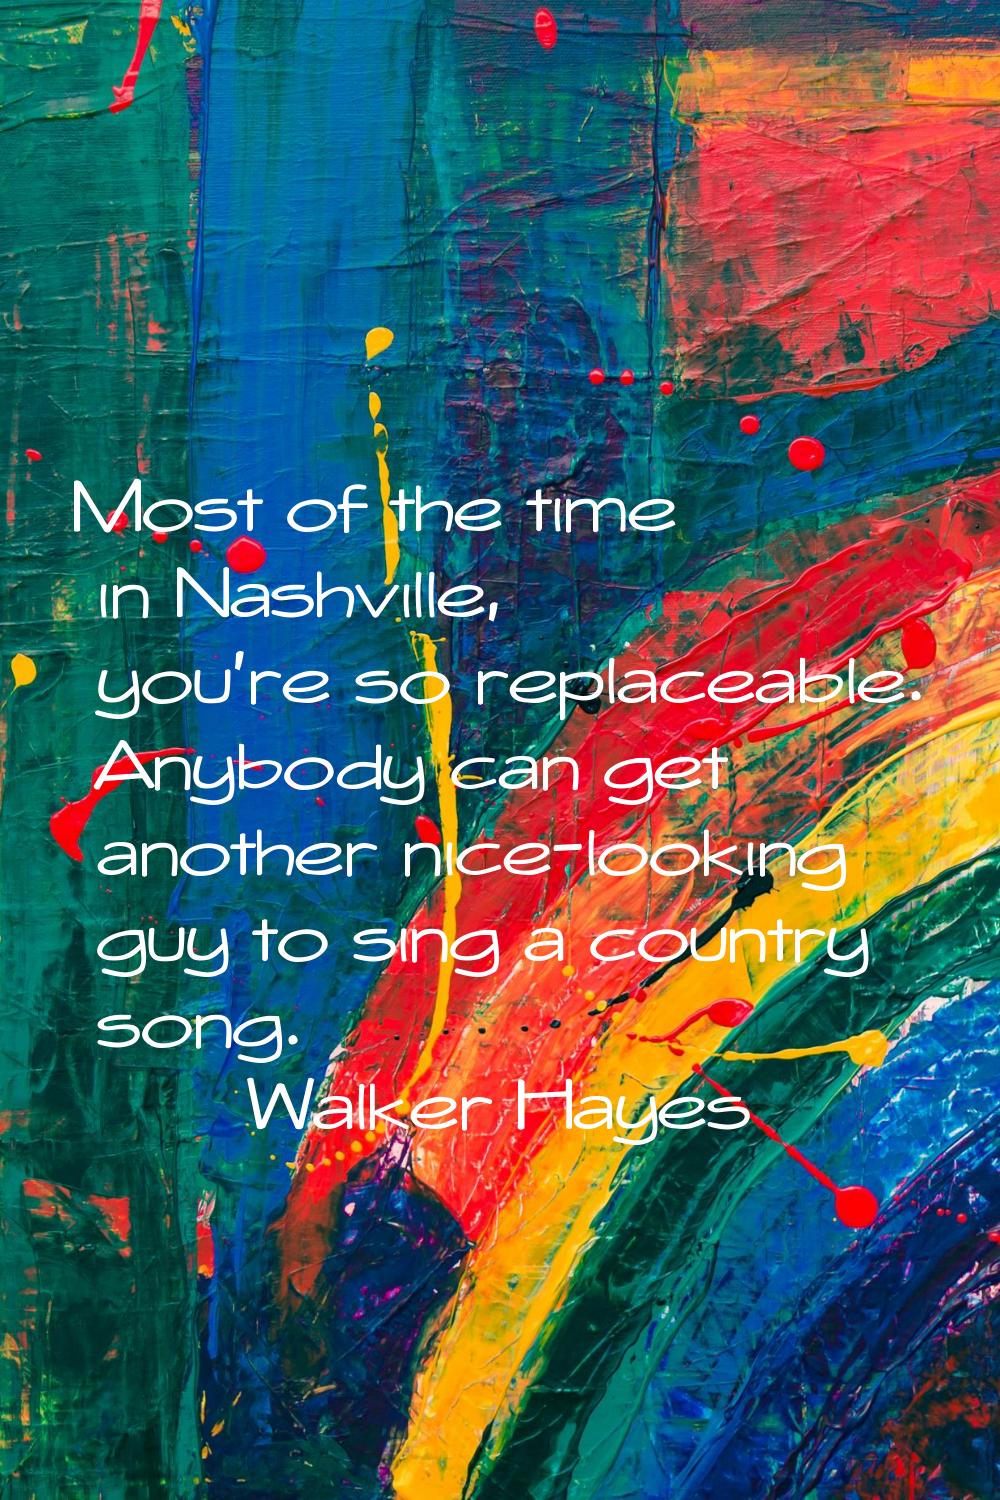 Most of the time in Nashville, you're so replaceable. Anybody can get another nice-looking guy to s